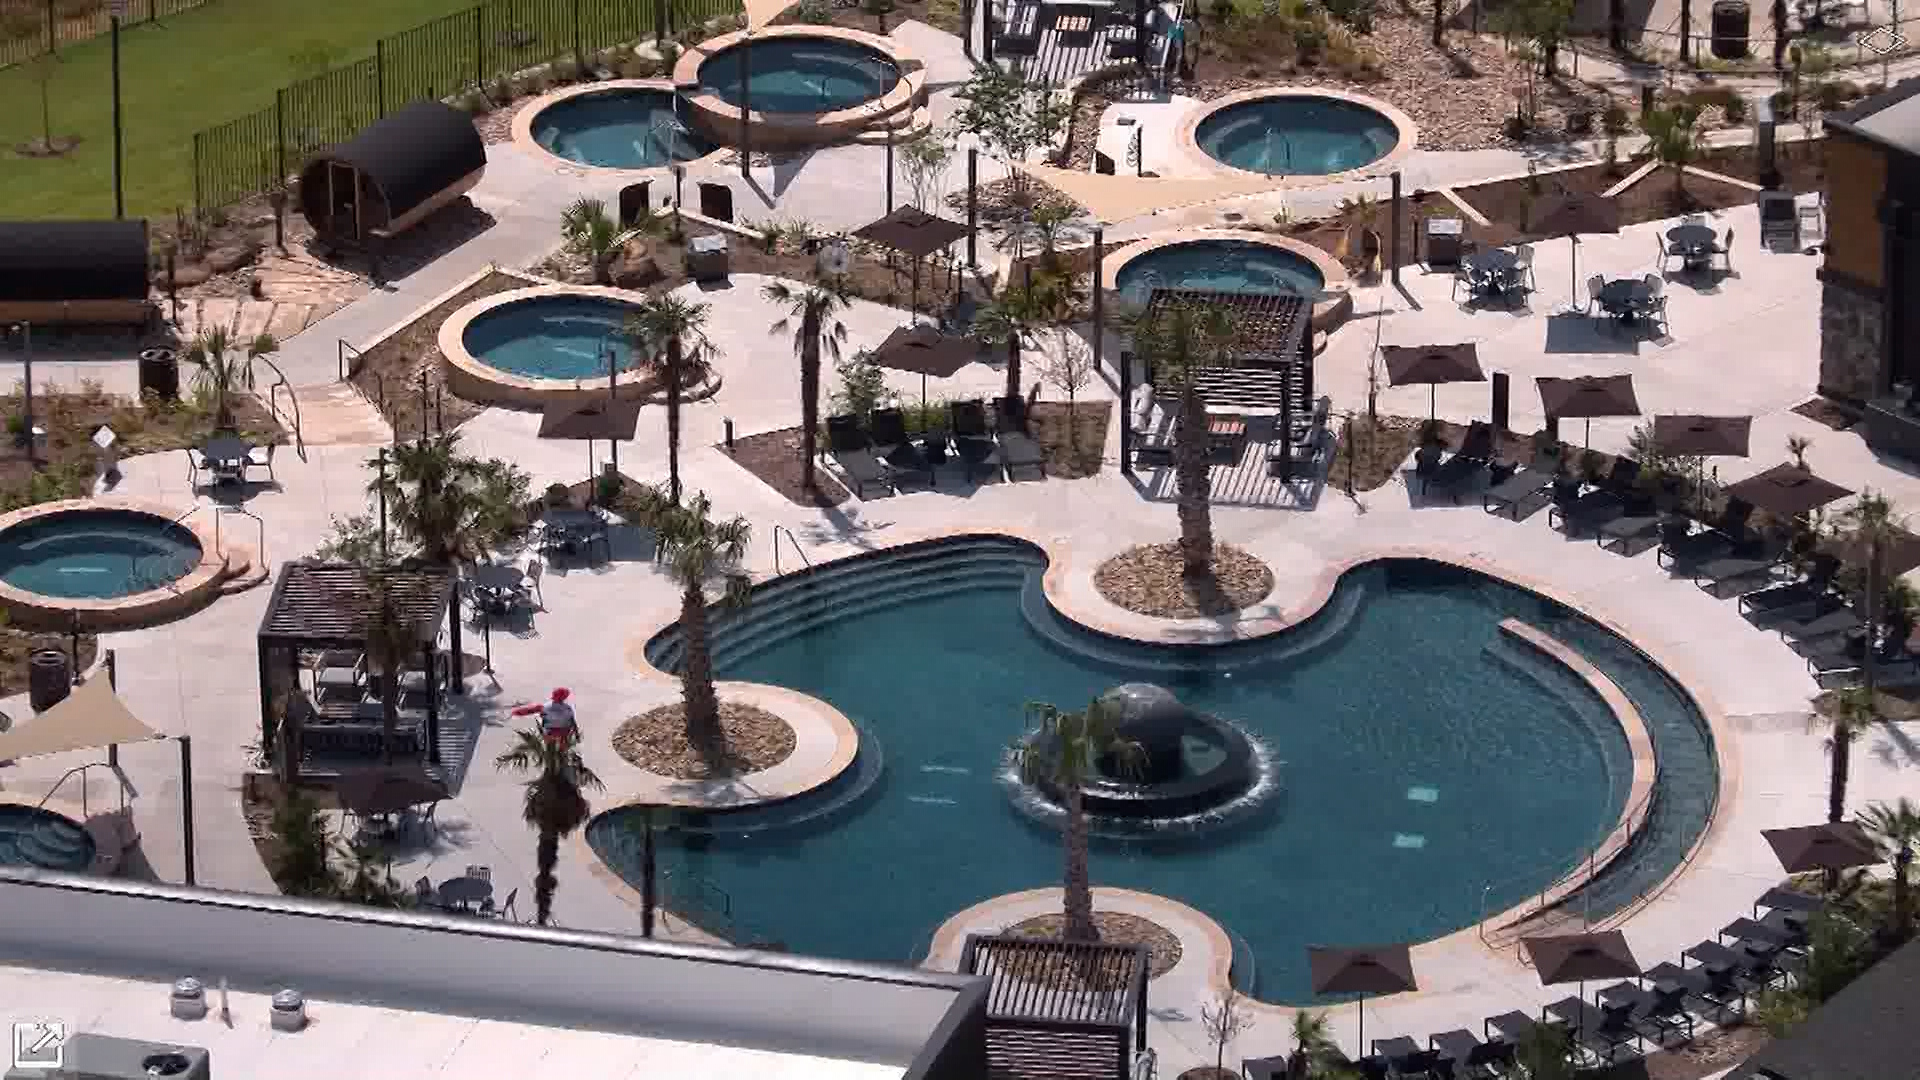 WorldSprings features 46 pools (41 mineral hot springs, two freshwater pools, and three cold plunges) inspired by nine unique global destinations.